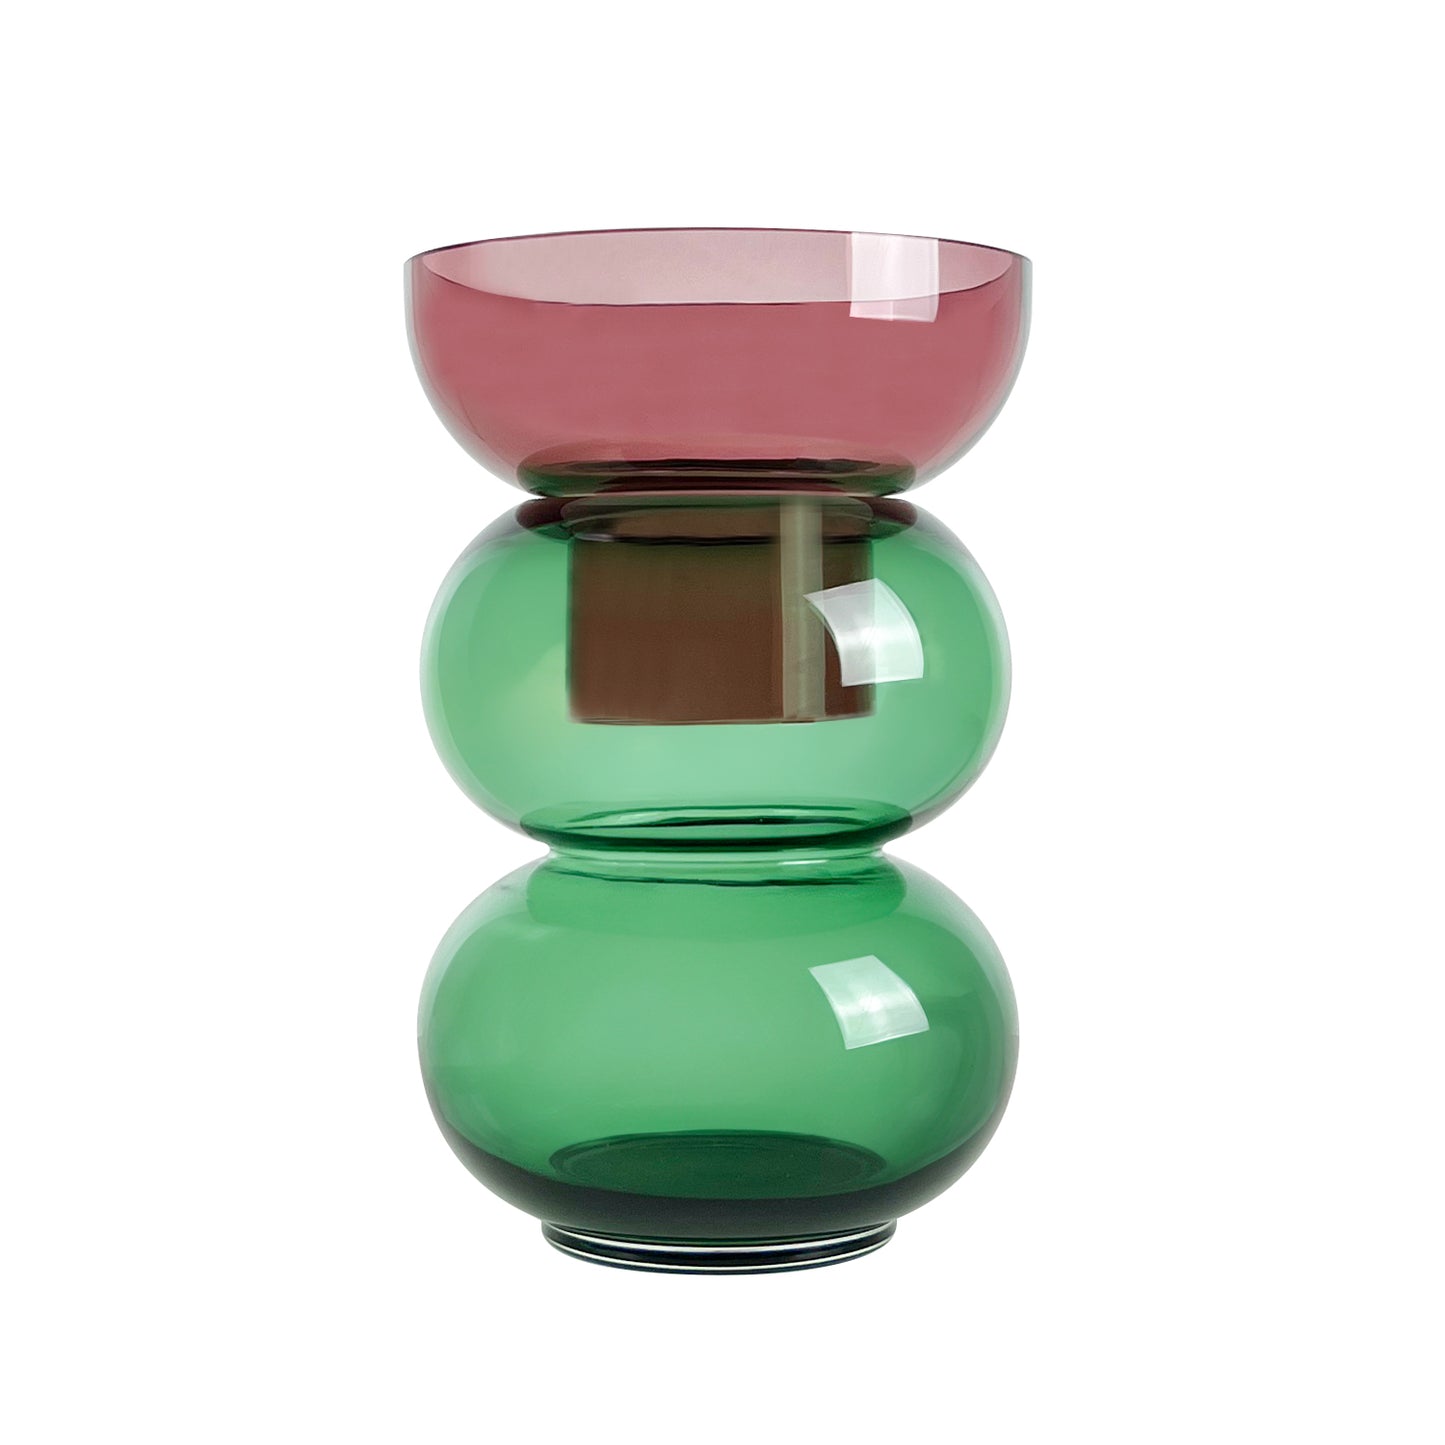 Bubble Vase in Large Pink and Green  - 30.5 x 20.5 x 20.5 x cm - Flip Vase - Reversible